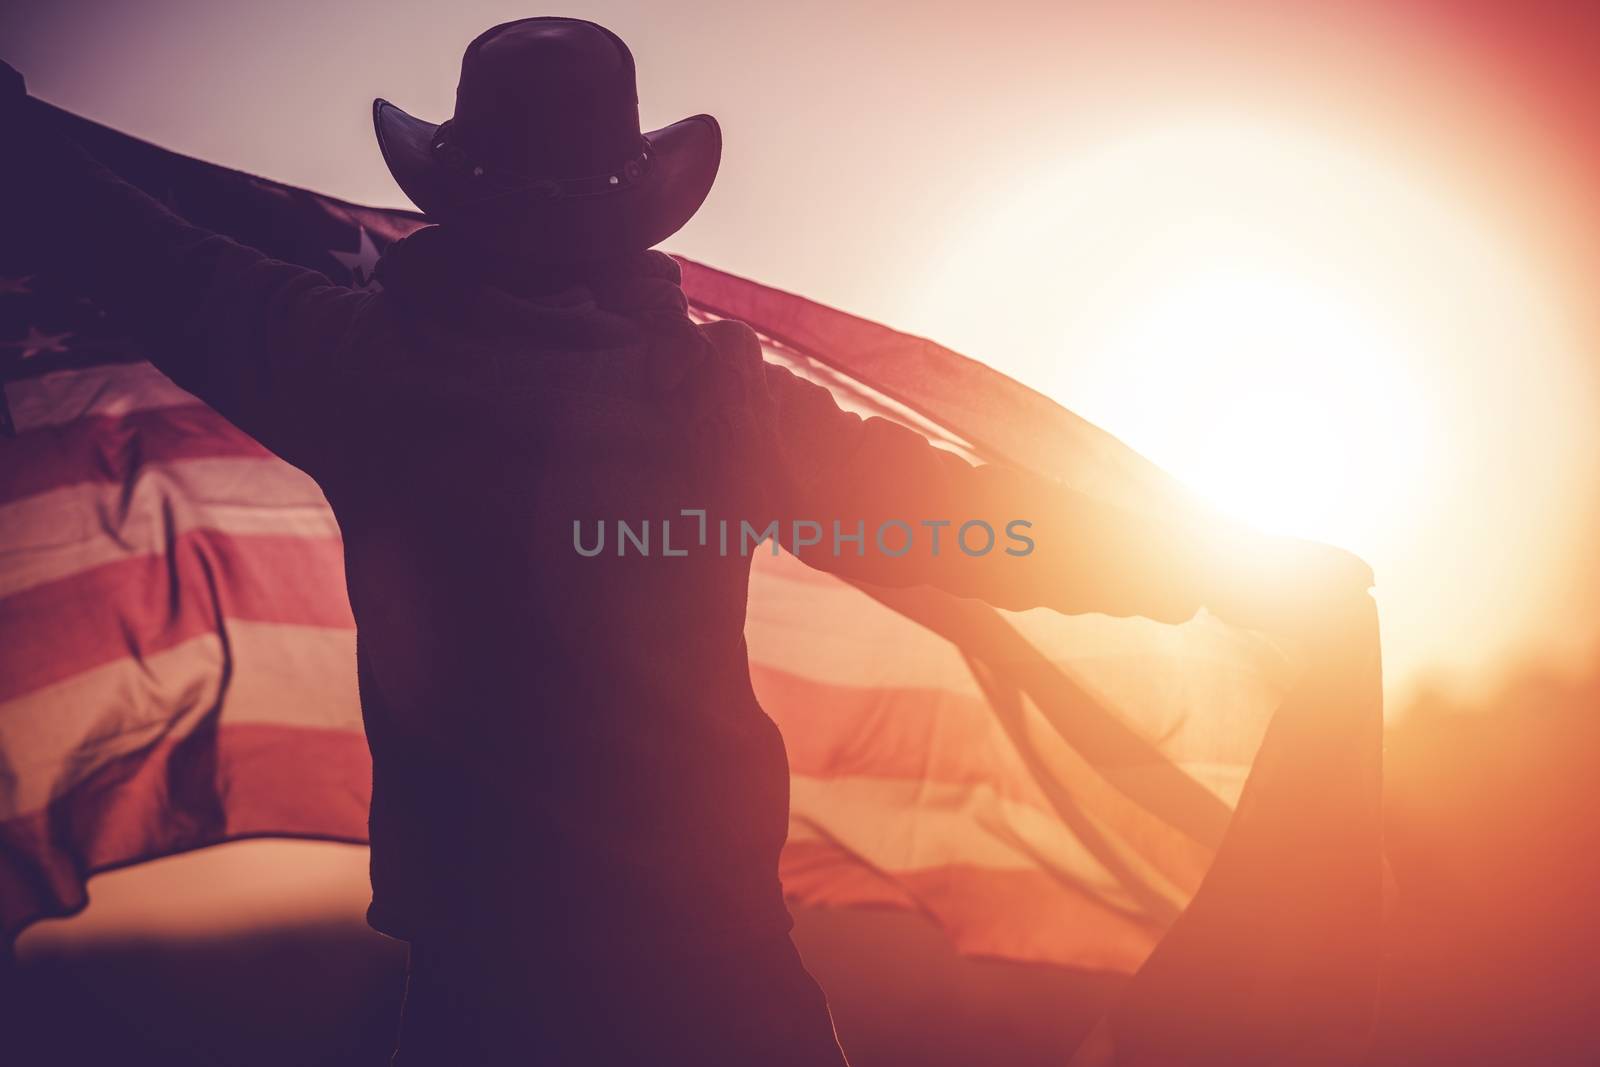 Independence Day Celebration. Western Wear Men in Cowboy Hat with United States of American Flag Celebrating 4th of July.